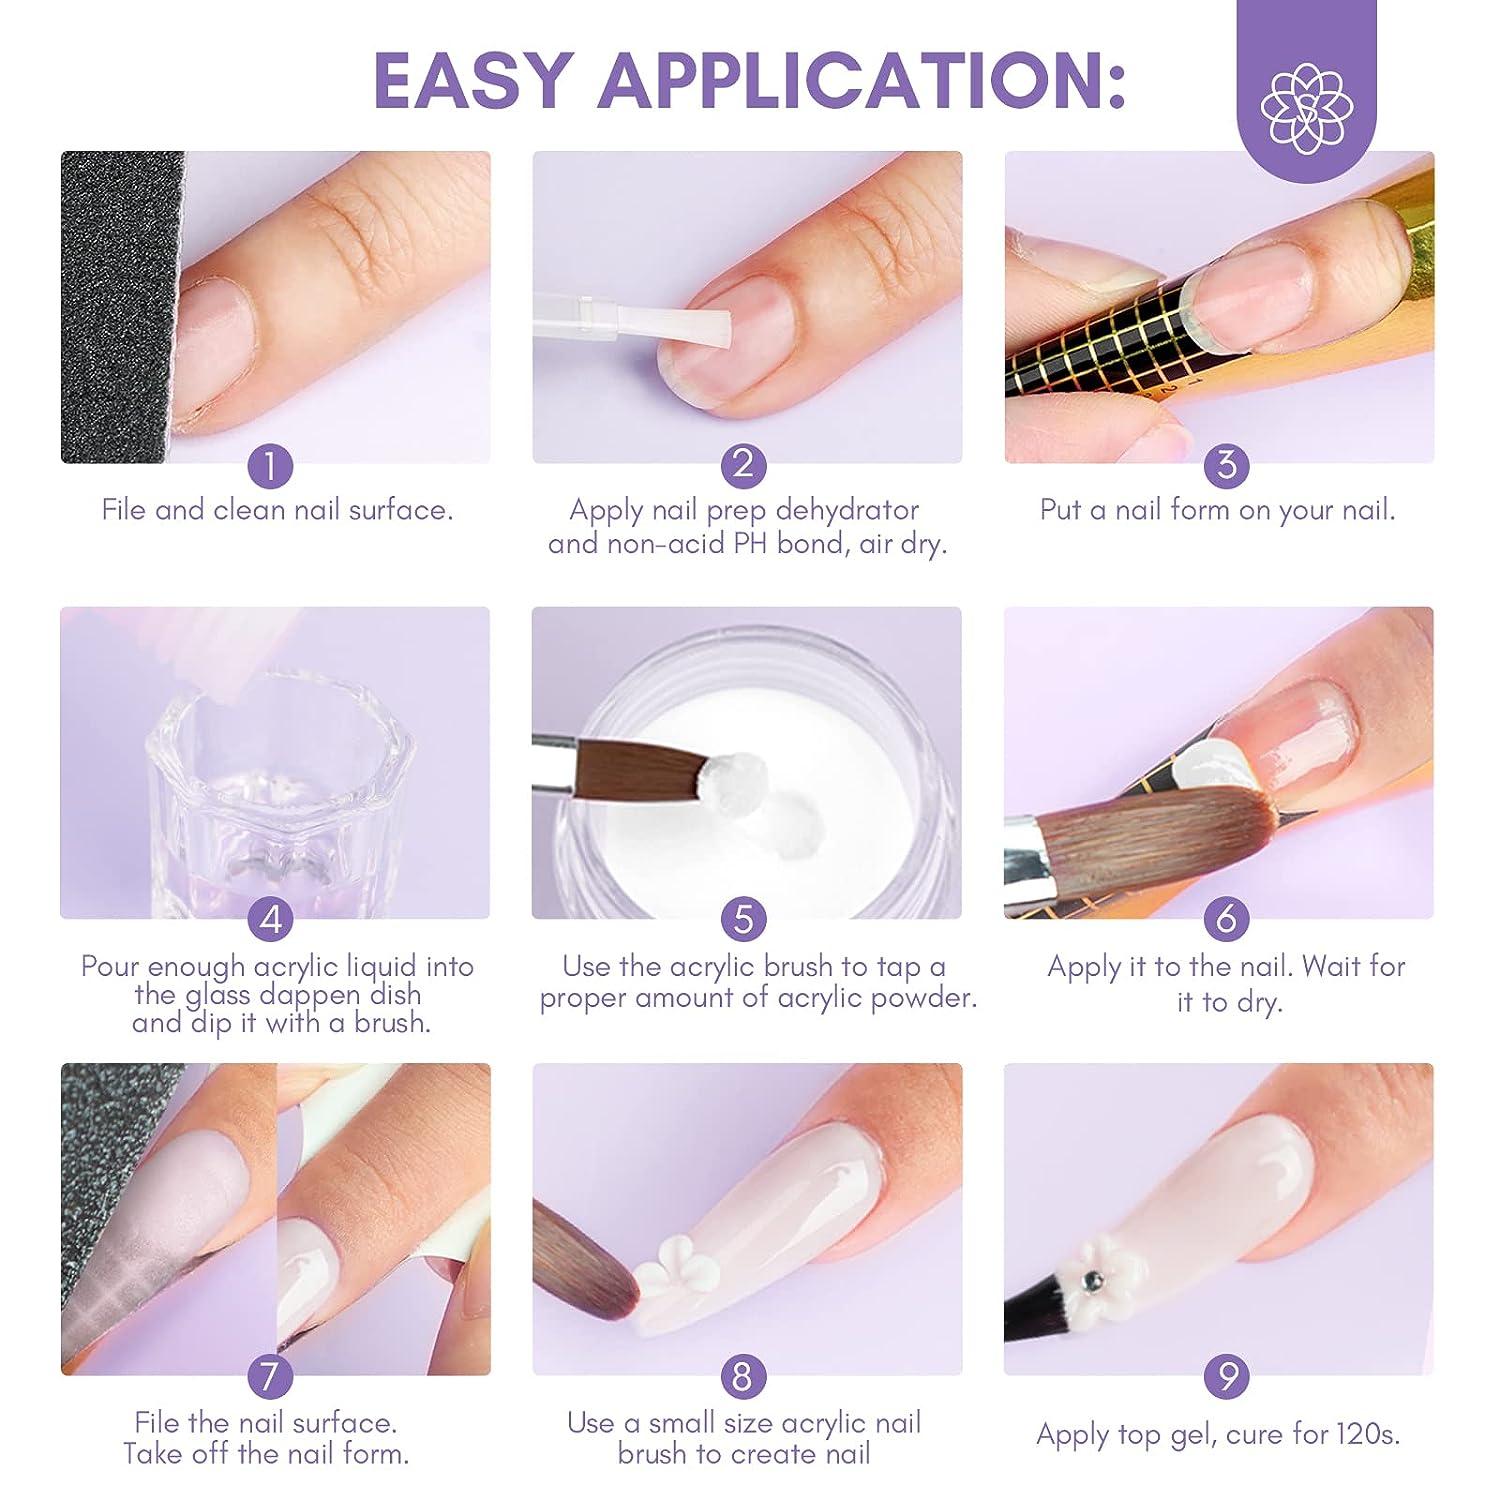 How to Airbrush Nail? - Prowin Tools